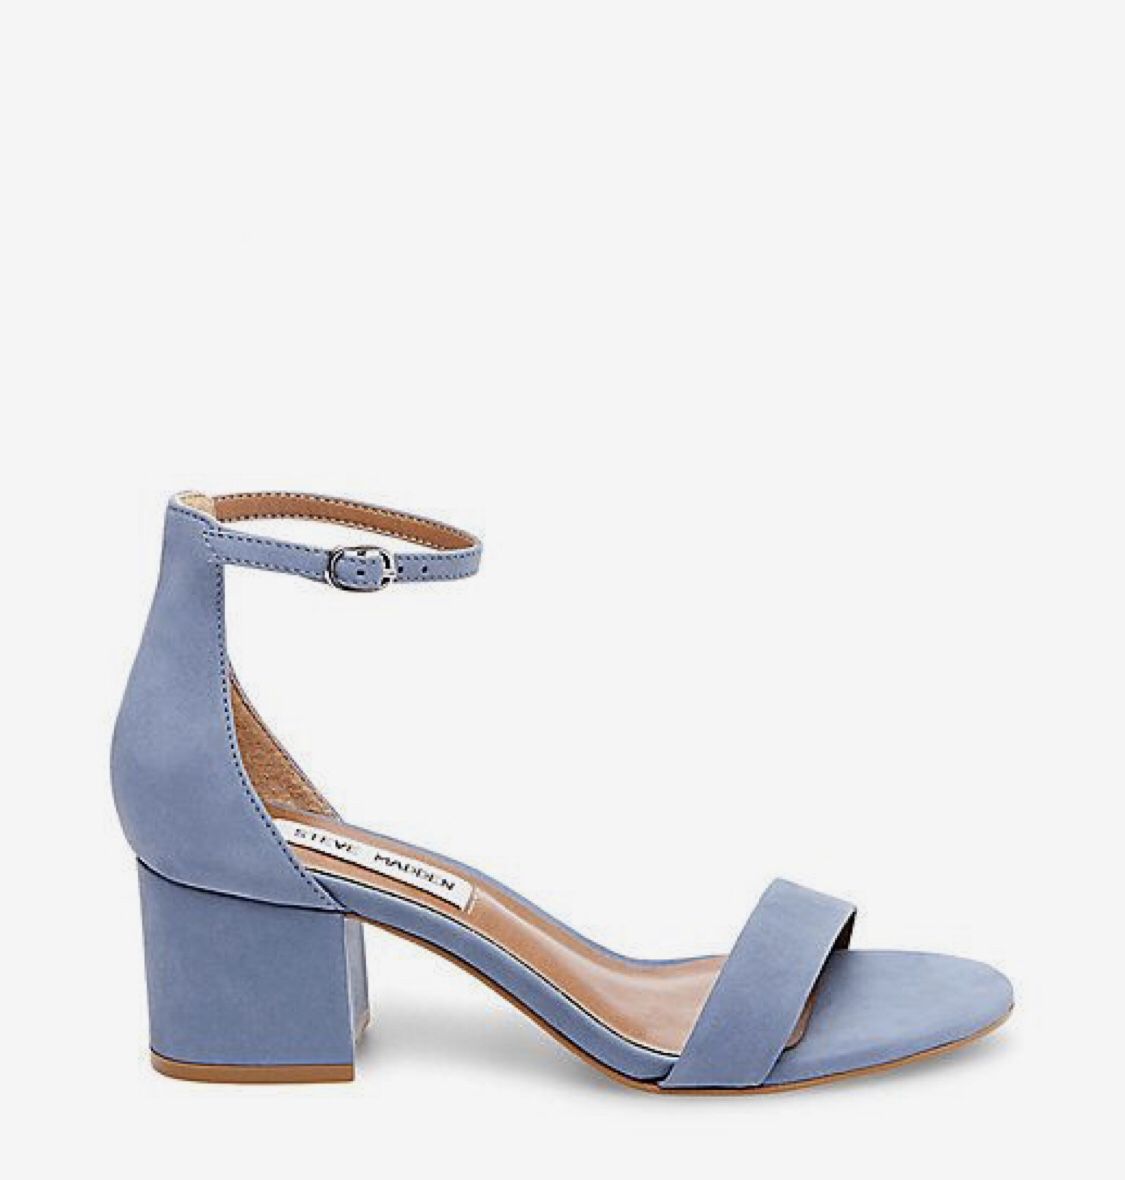 Steve Madden Dusty Blue Suede chunky heel for Sale in Simi Valley, CA ...